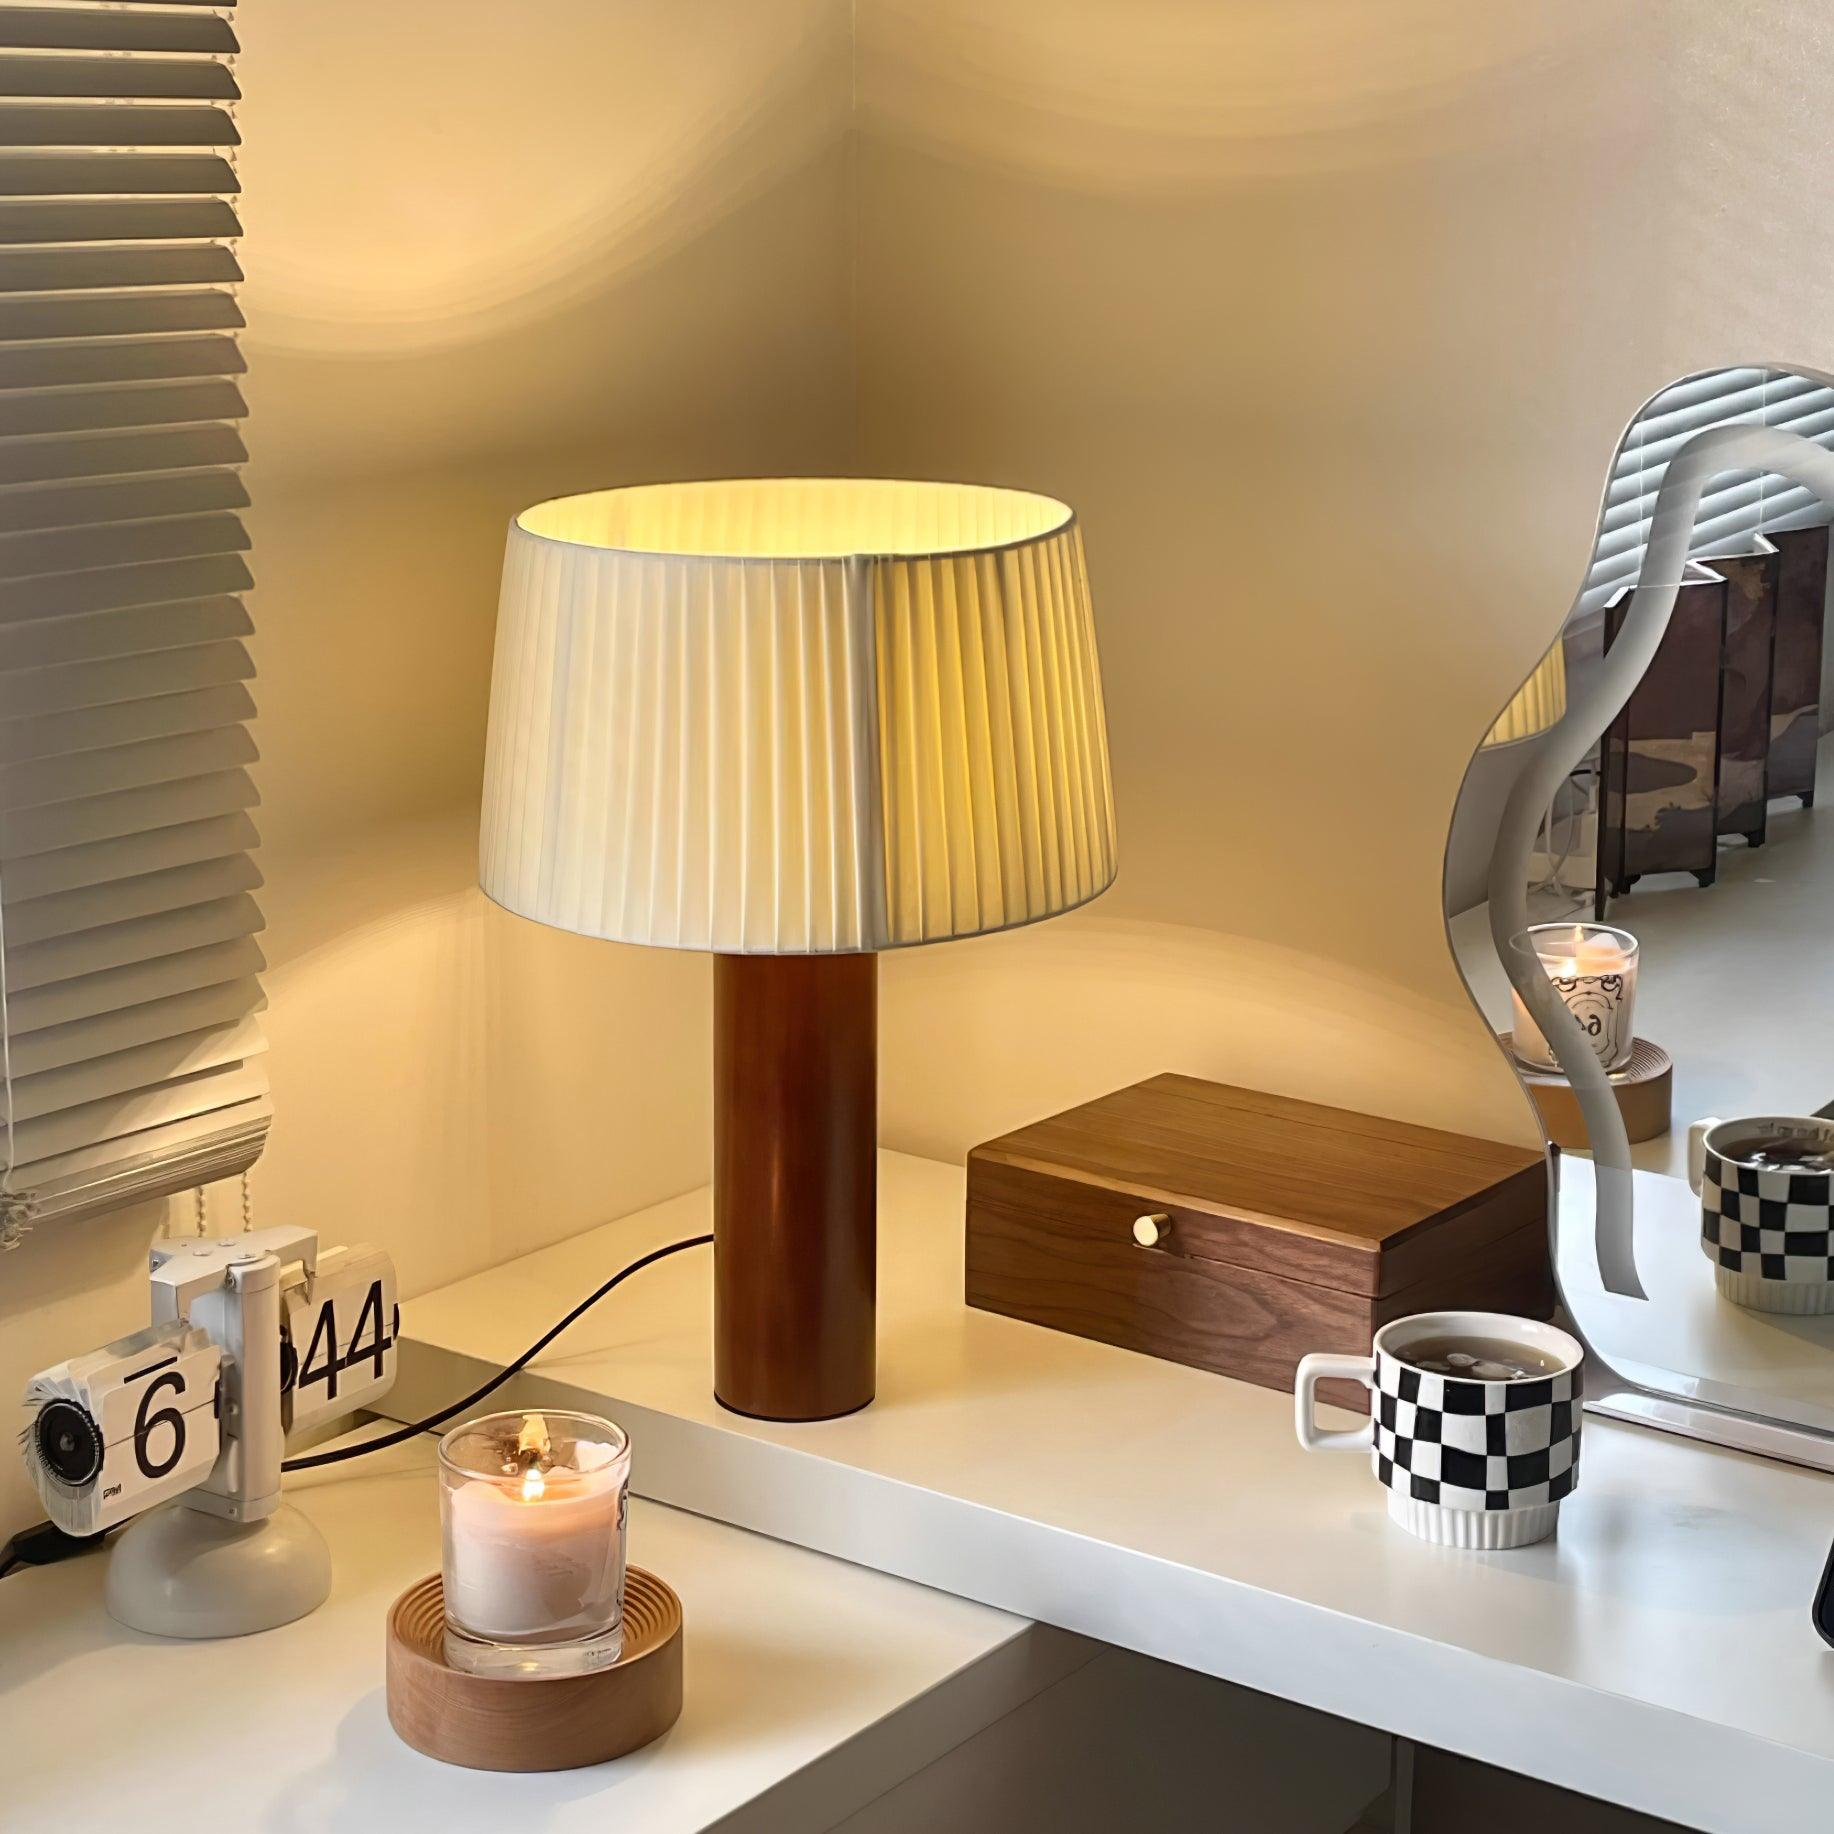 5 Beautiful and Practical Wooden Lamps: Illuminate Your Home with Elegance